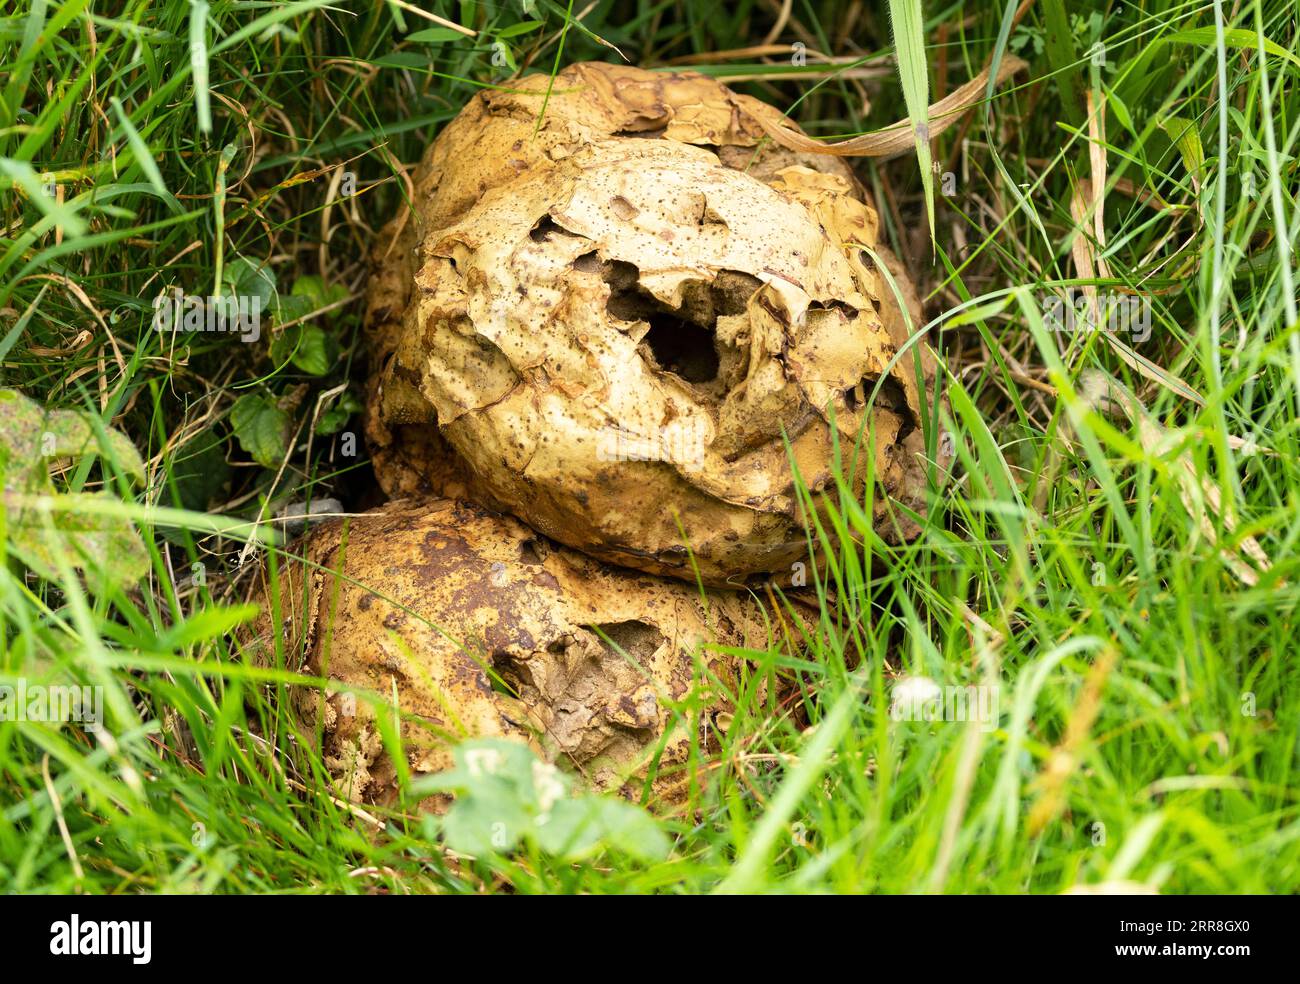 When it matures and is ready to disperse spores in vast quantities, the Giant Puffball turns brown and cracks open releasing the windblown spores. Stock Photo